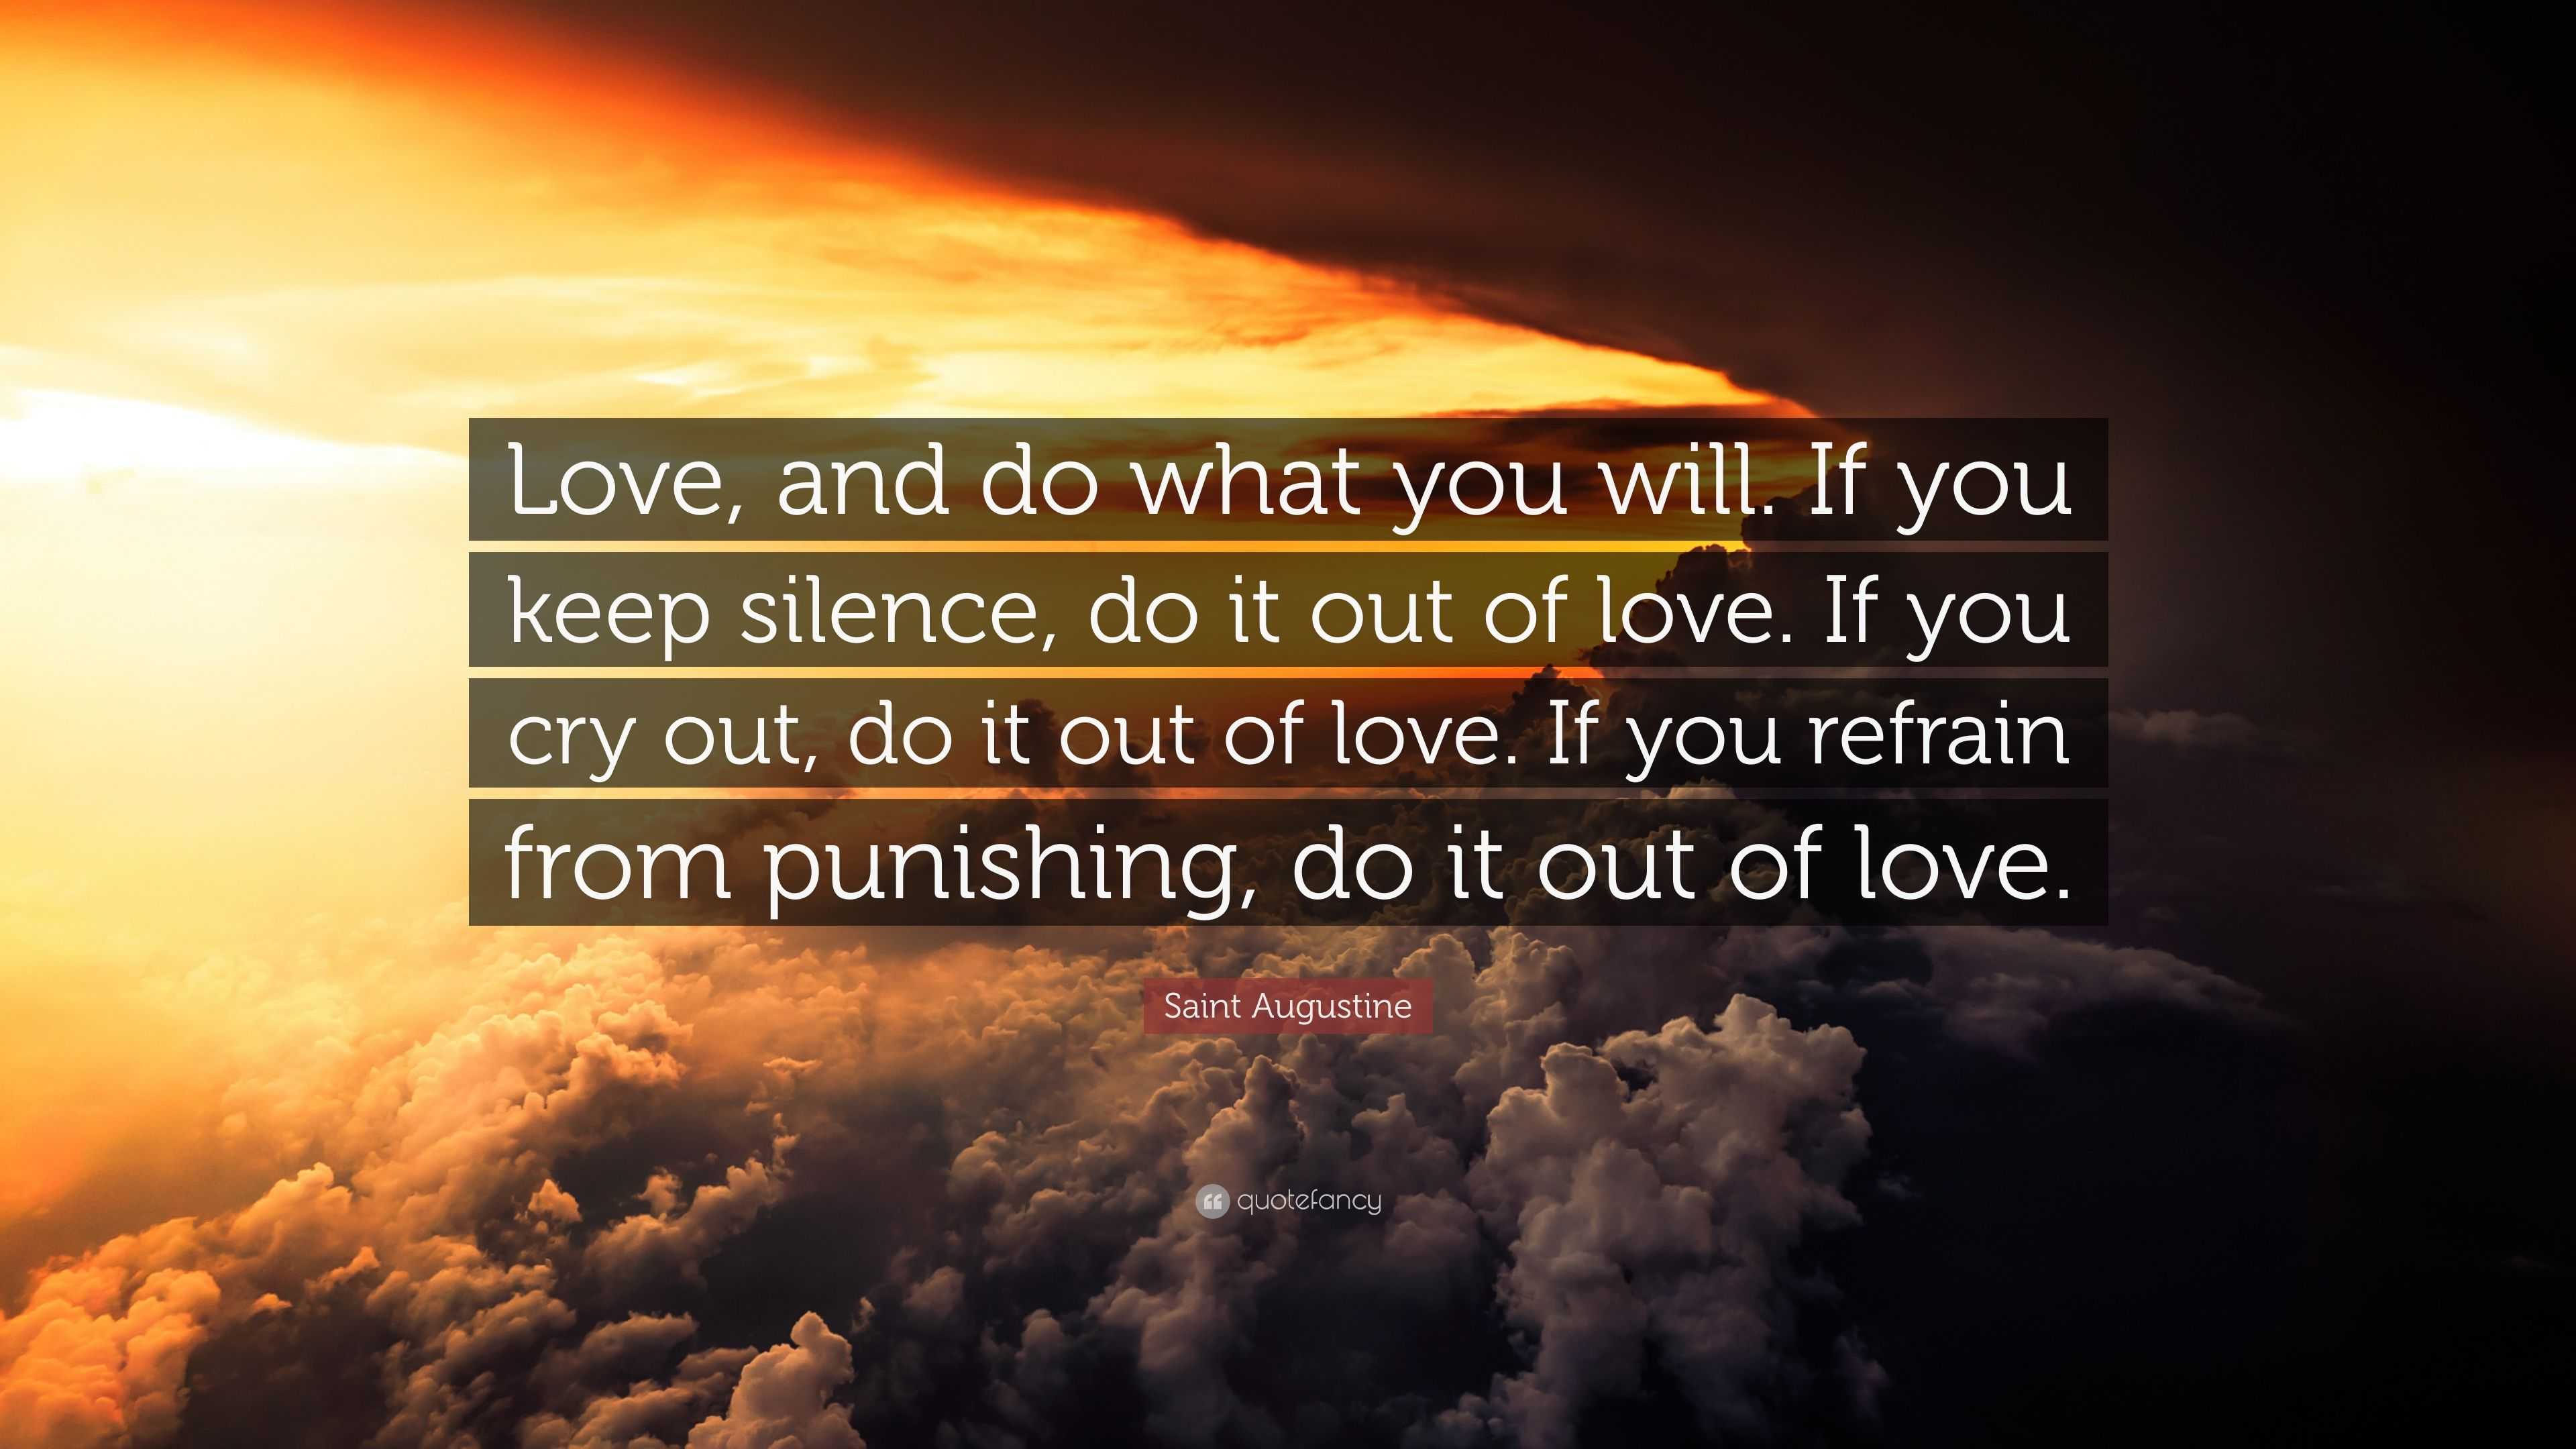 Saint Augustine Quote: “Love, and do what you will. If you keep silence ...